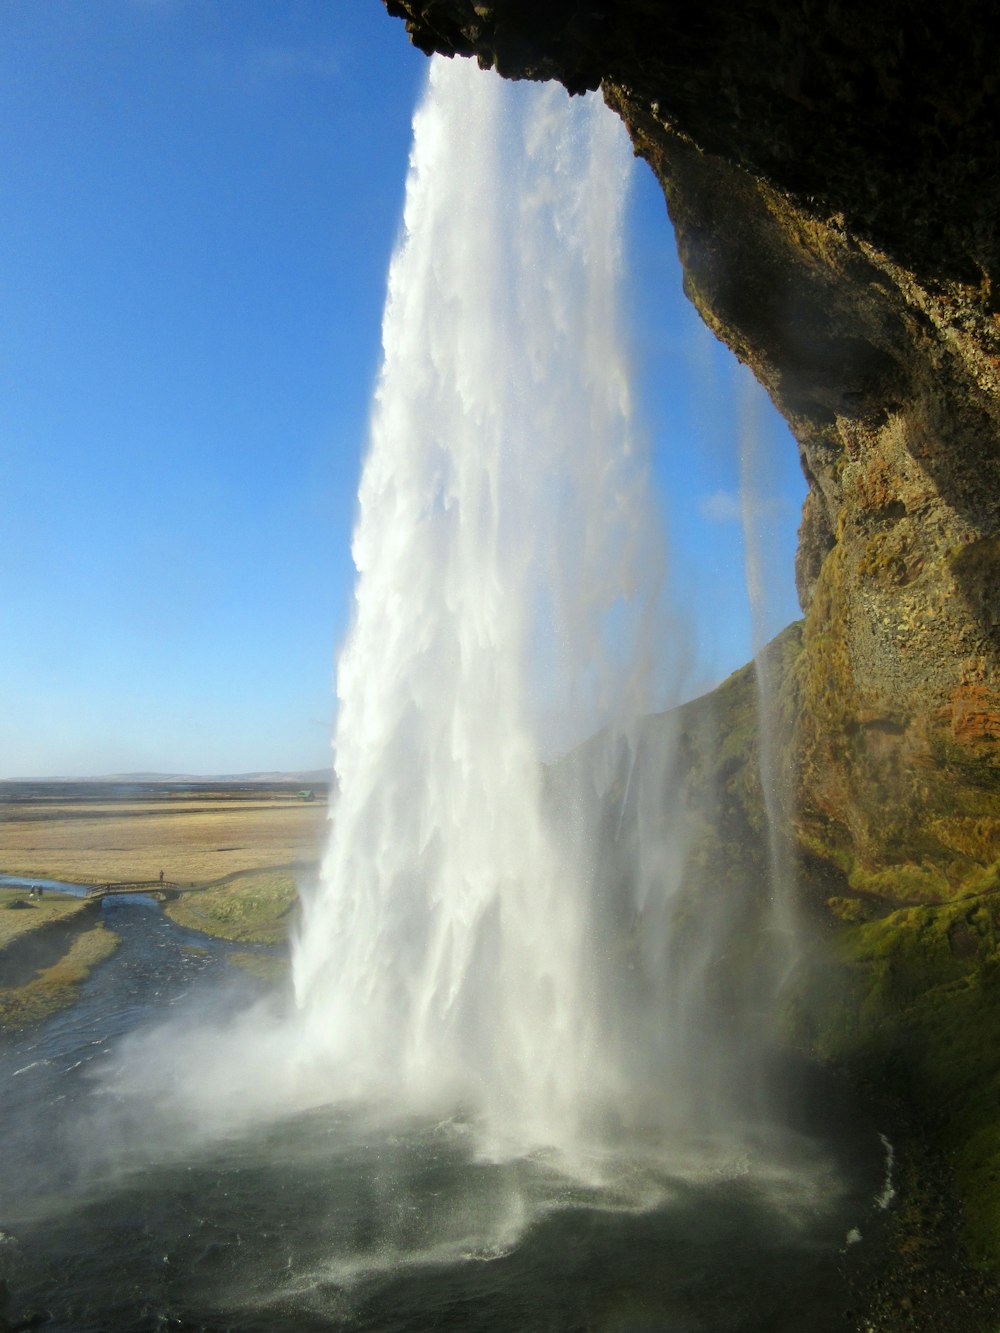 a large waterfall spewing out water into the air